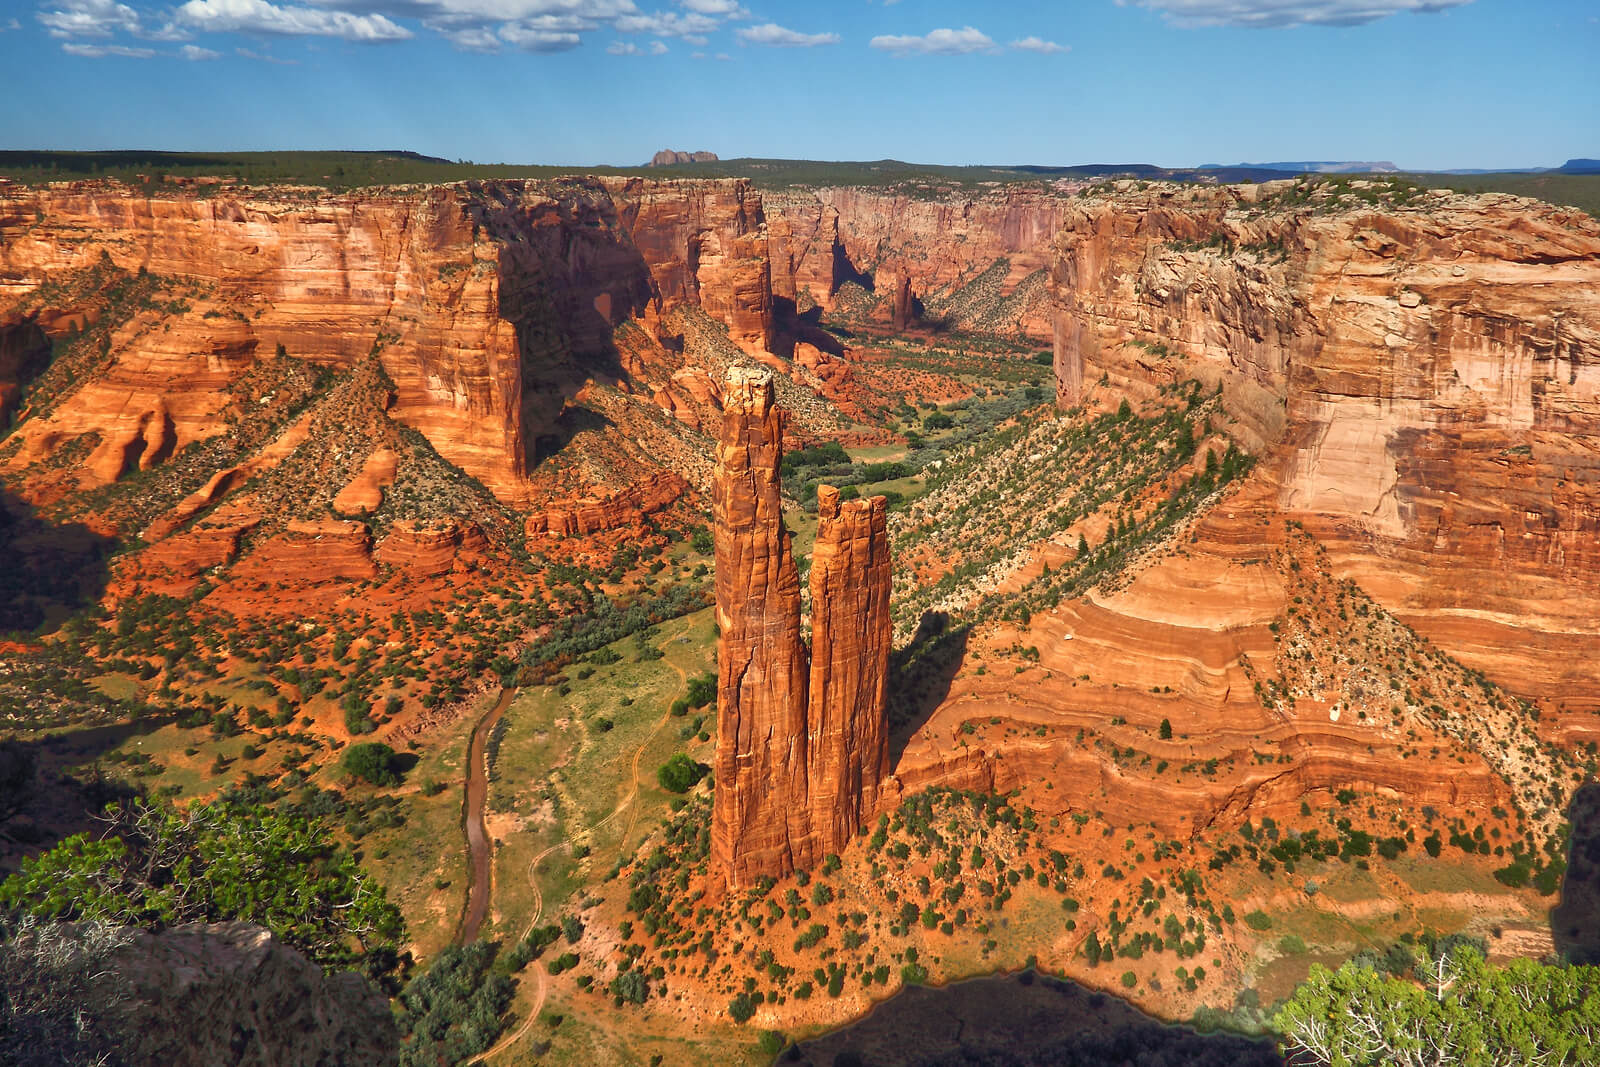 Aerial shot of Canyon de Chelly. Looking down on Spider Rock. 
Flickr User RH&XL